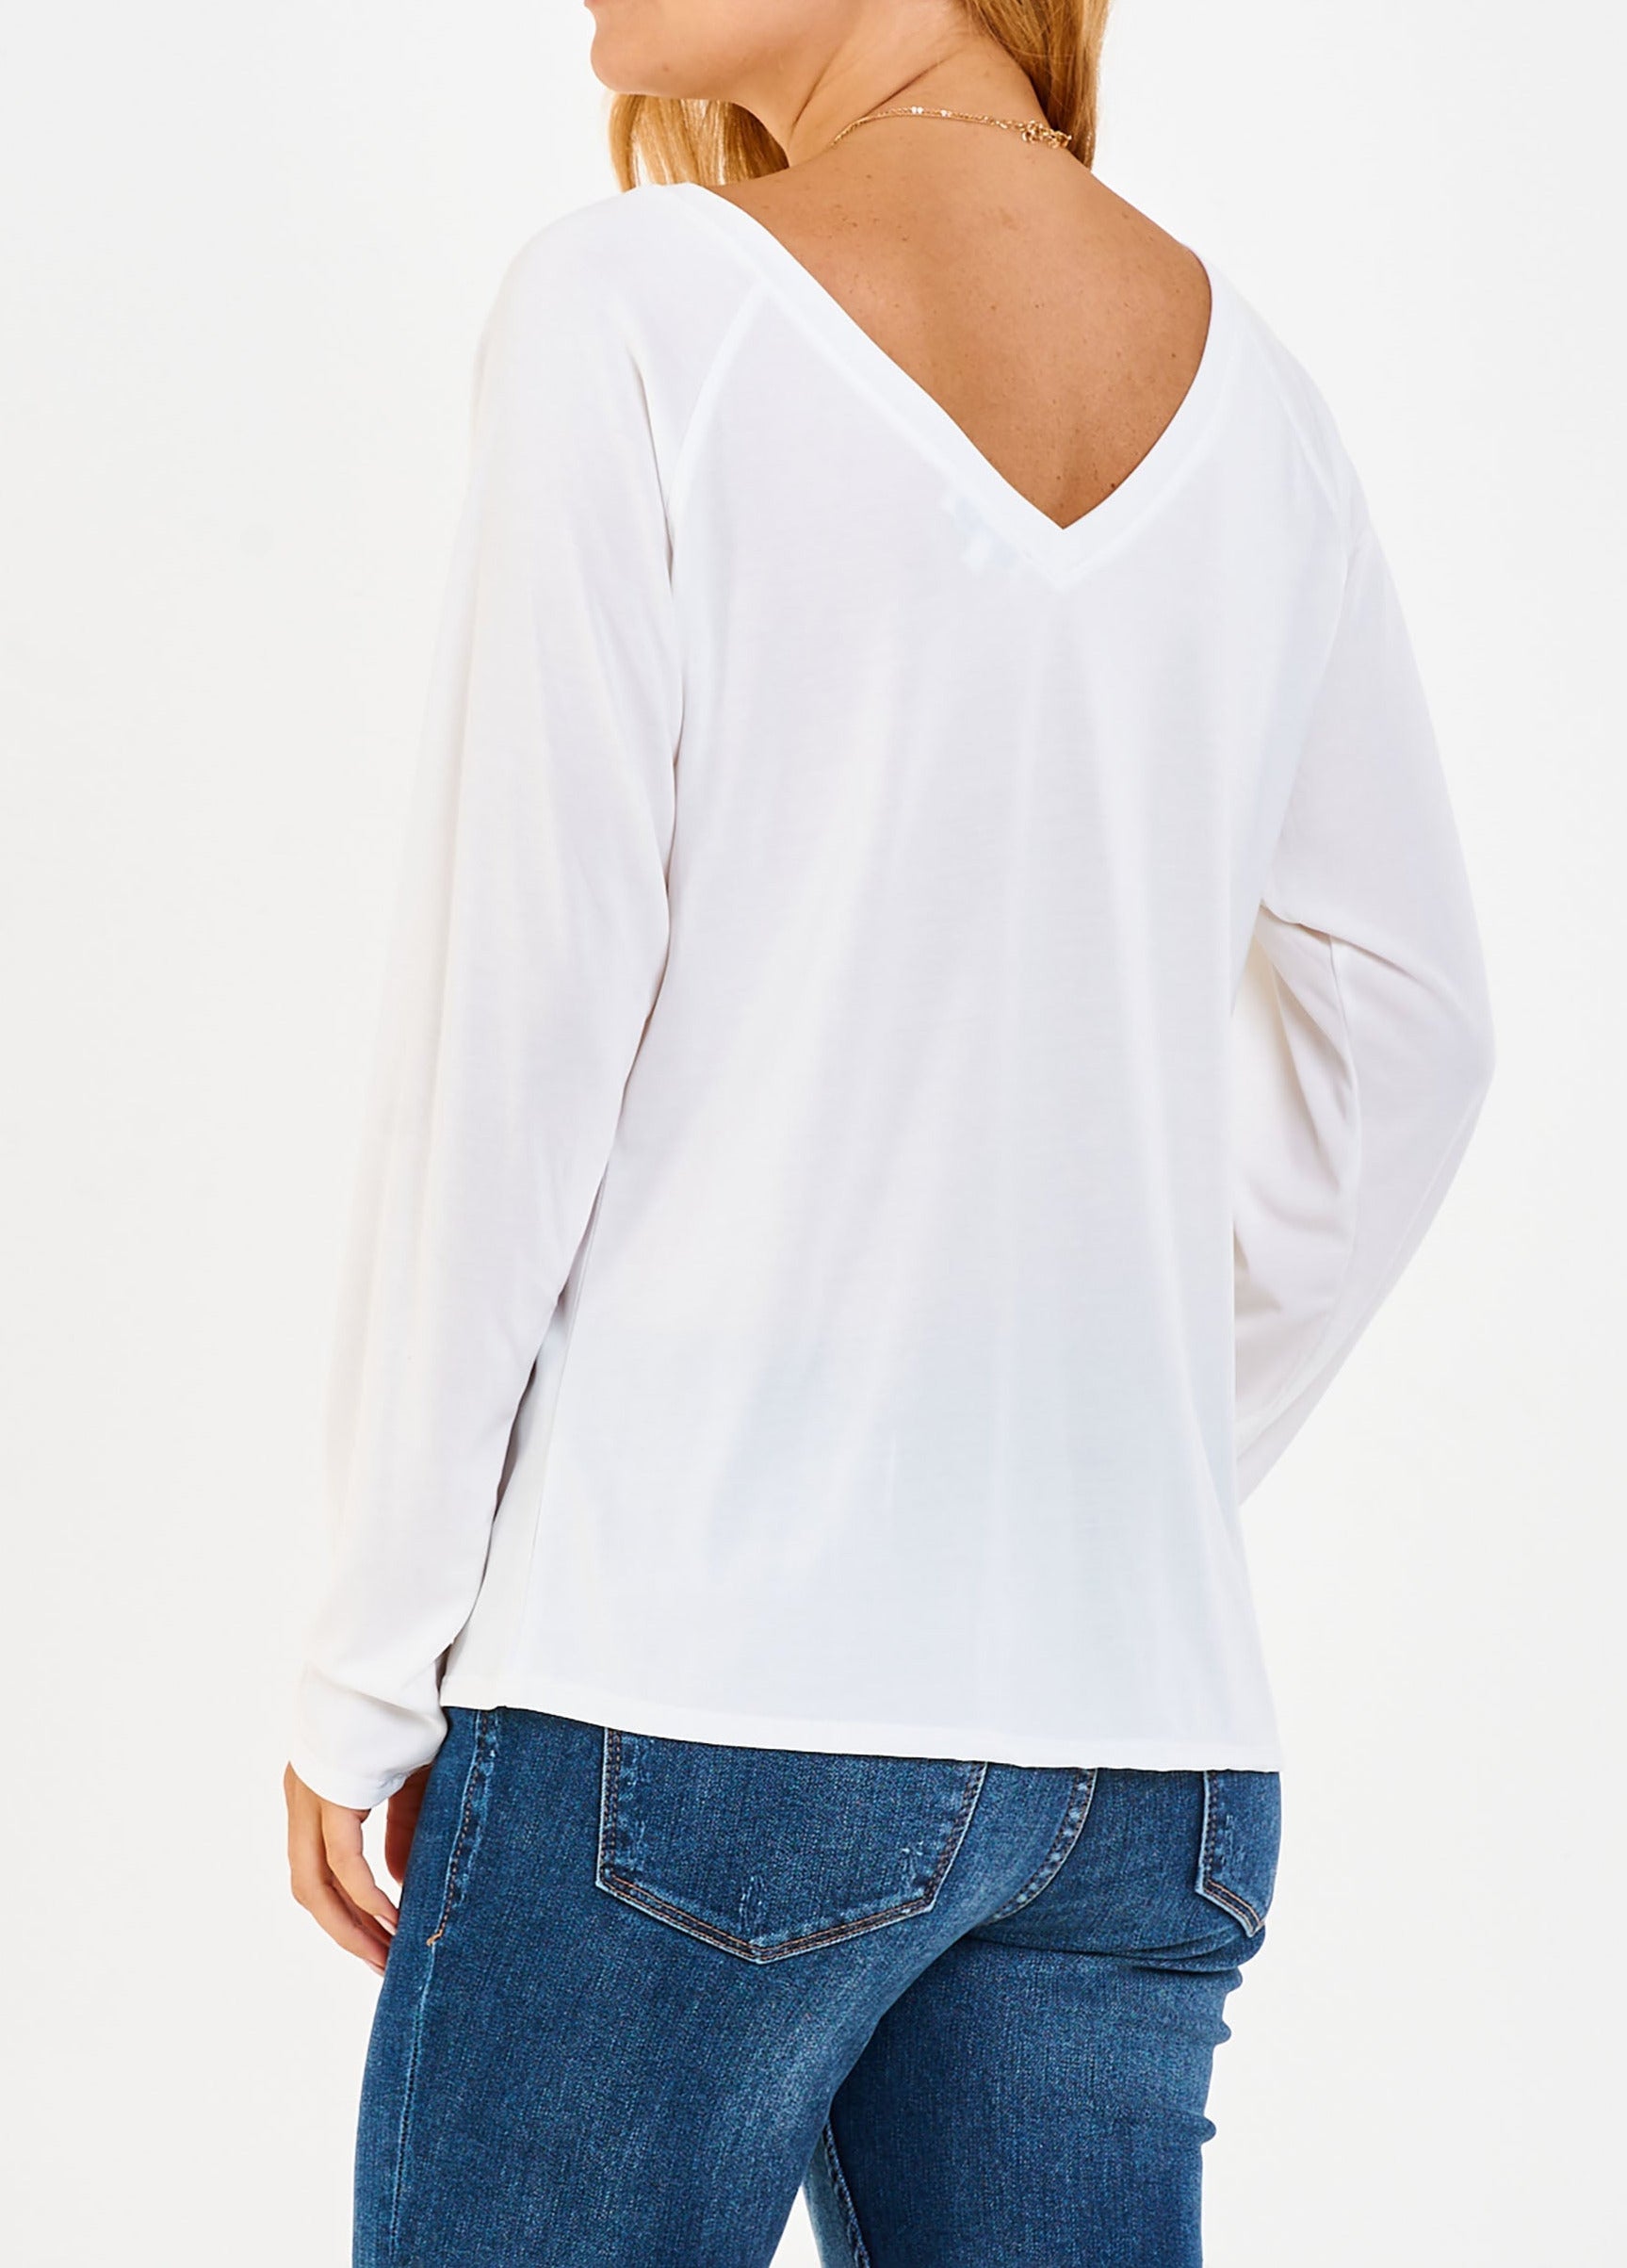 liv-double-vneck-top-white-back-image-another-love-clothing